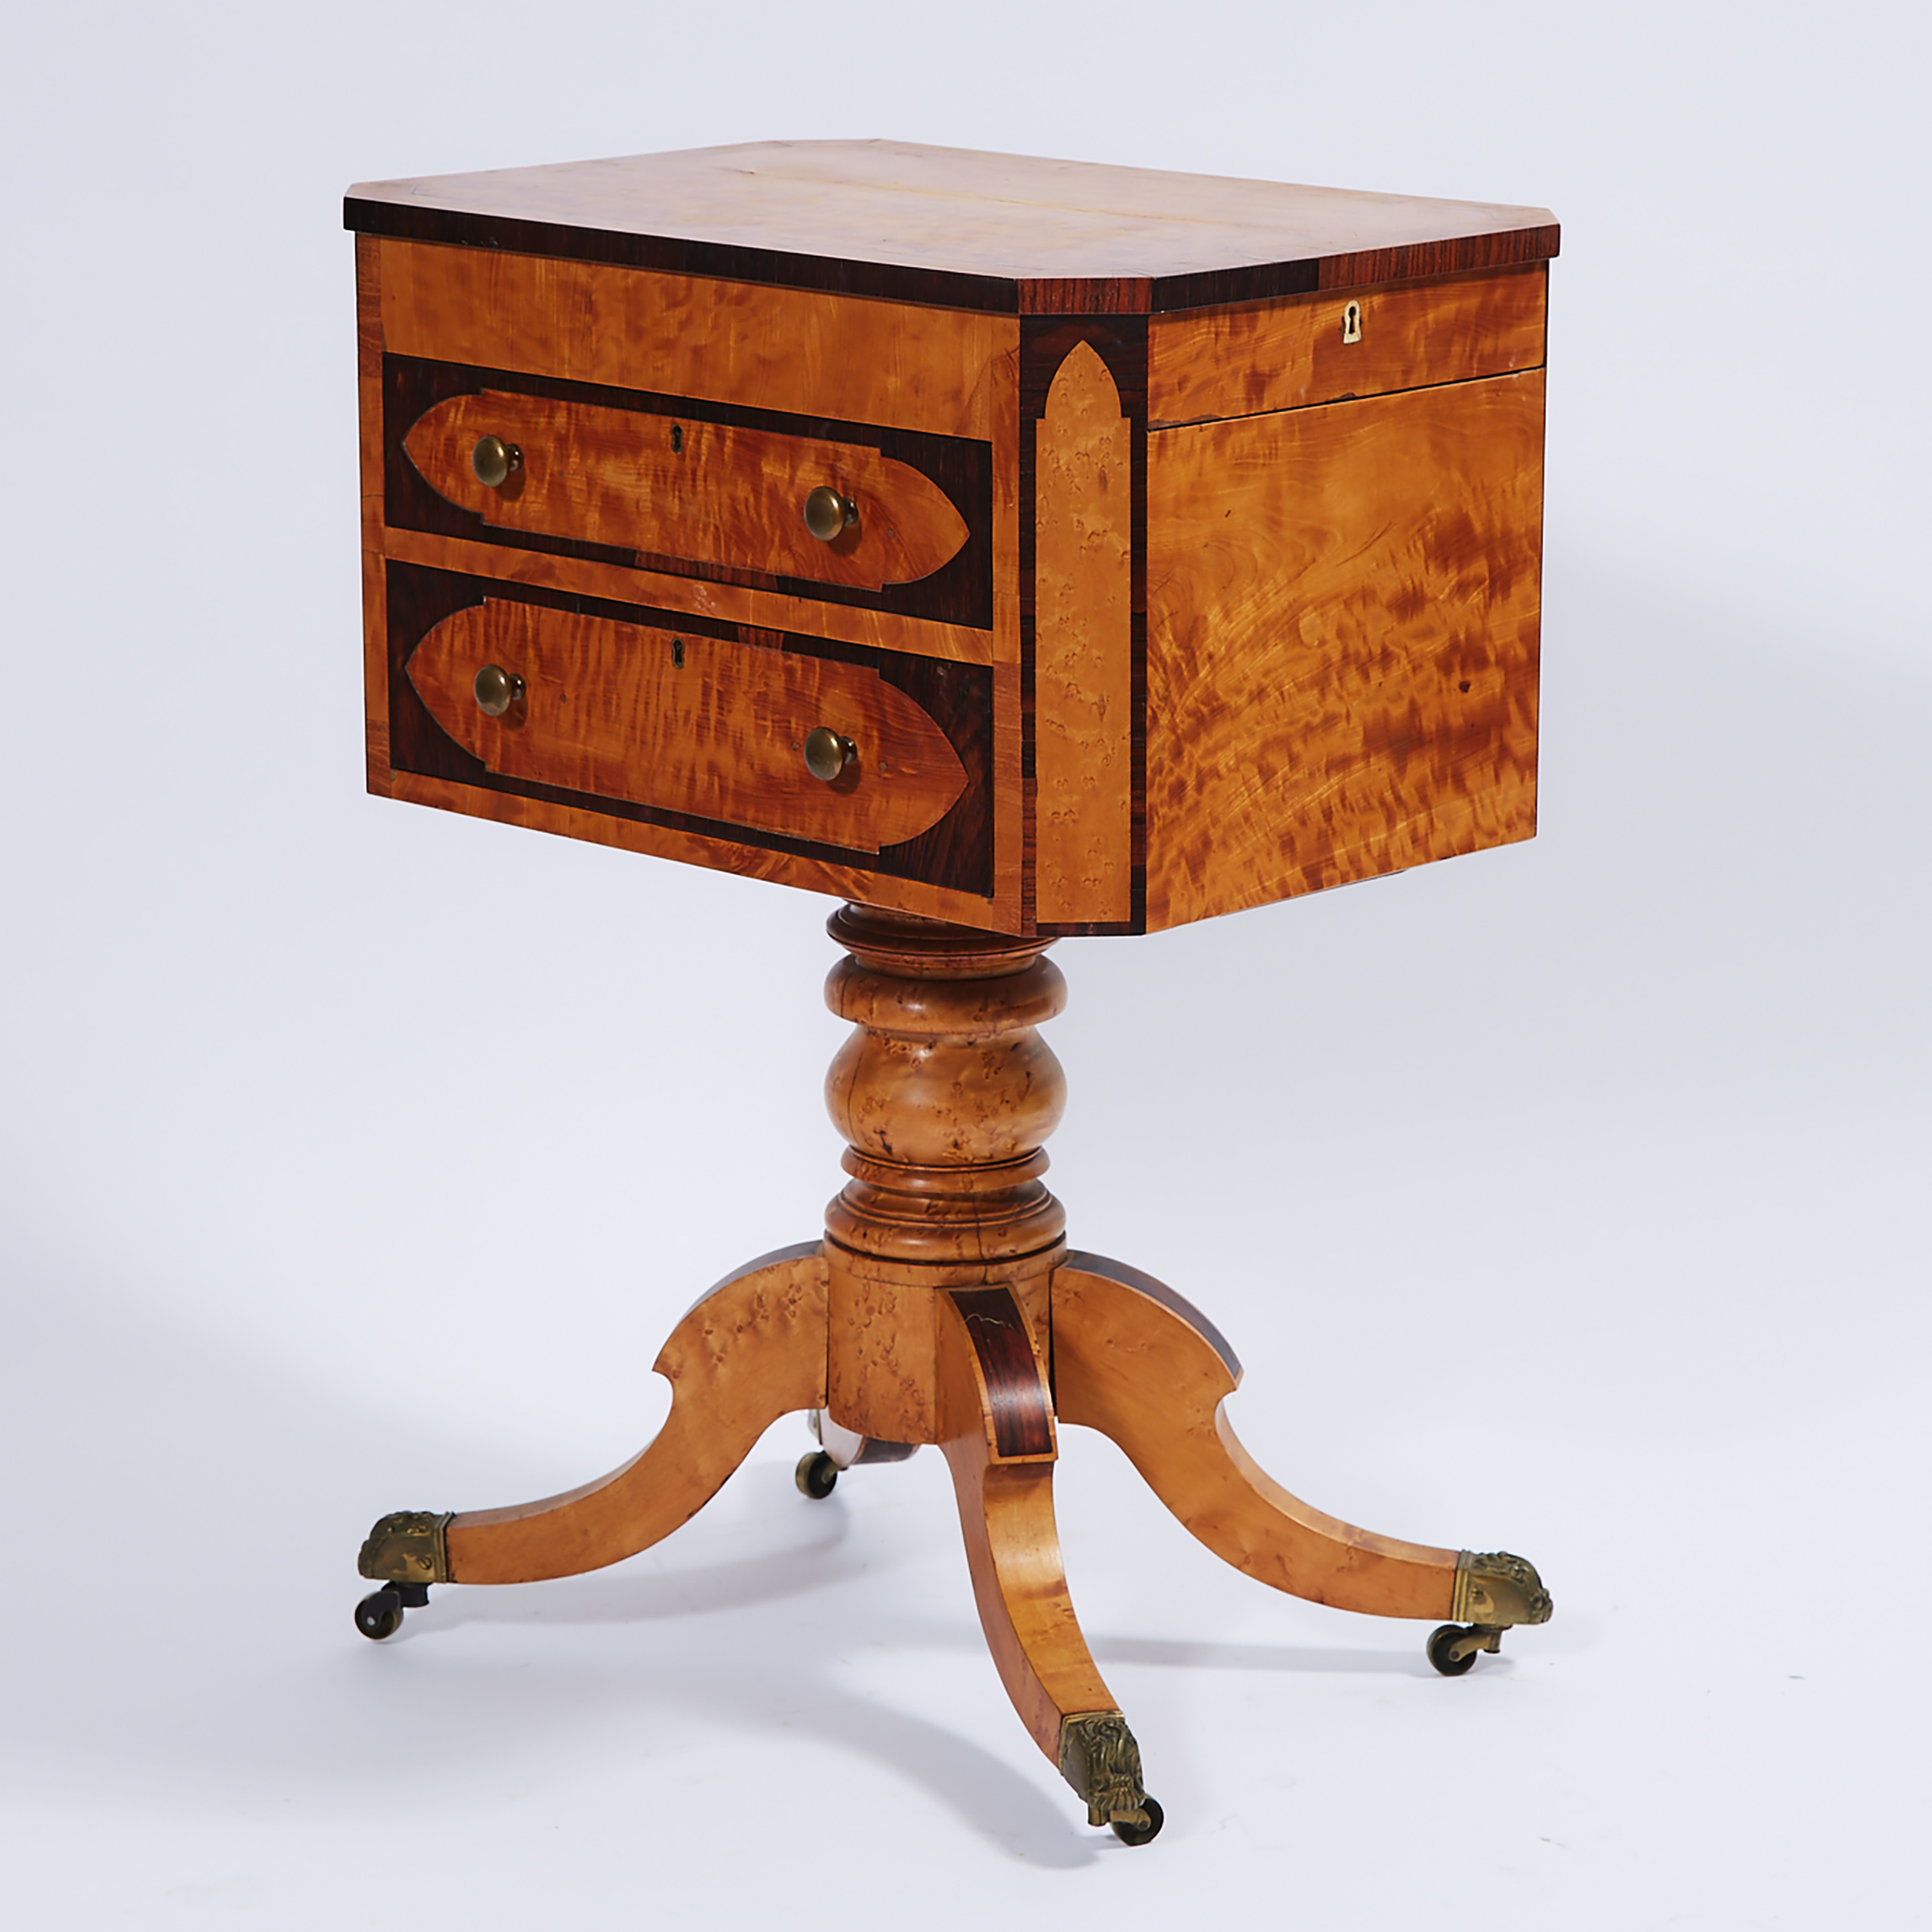 Ontario Neoclassical Rosewood and Figured Maple Pedestal Work Table, Eastern Counties, c.1830